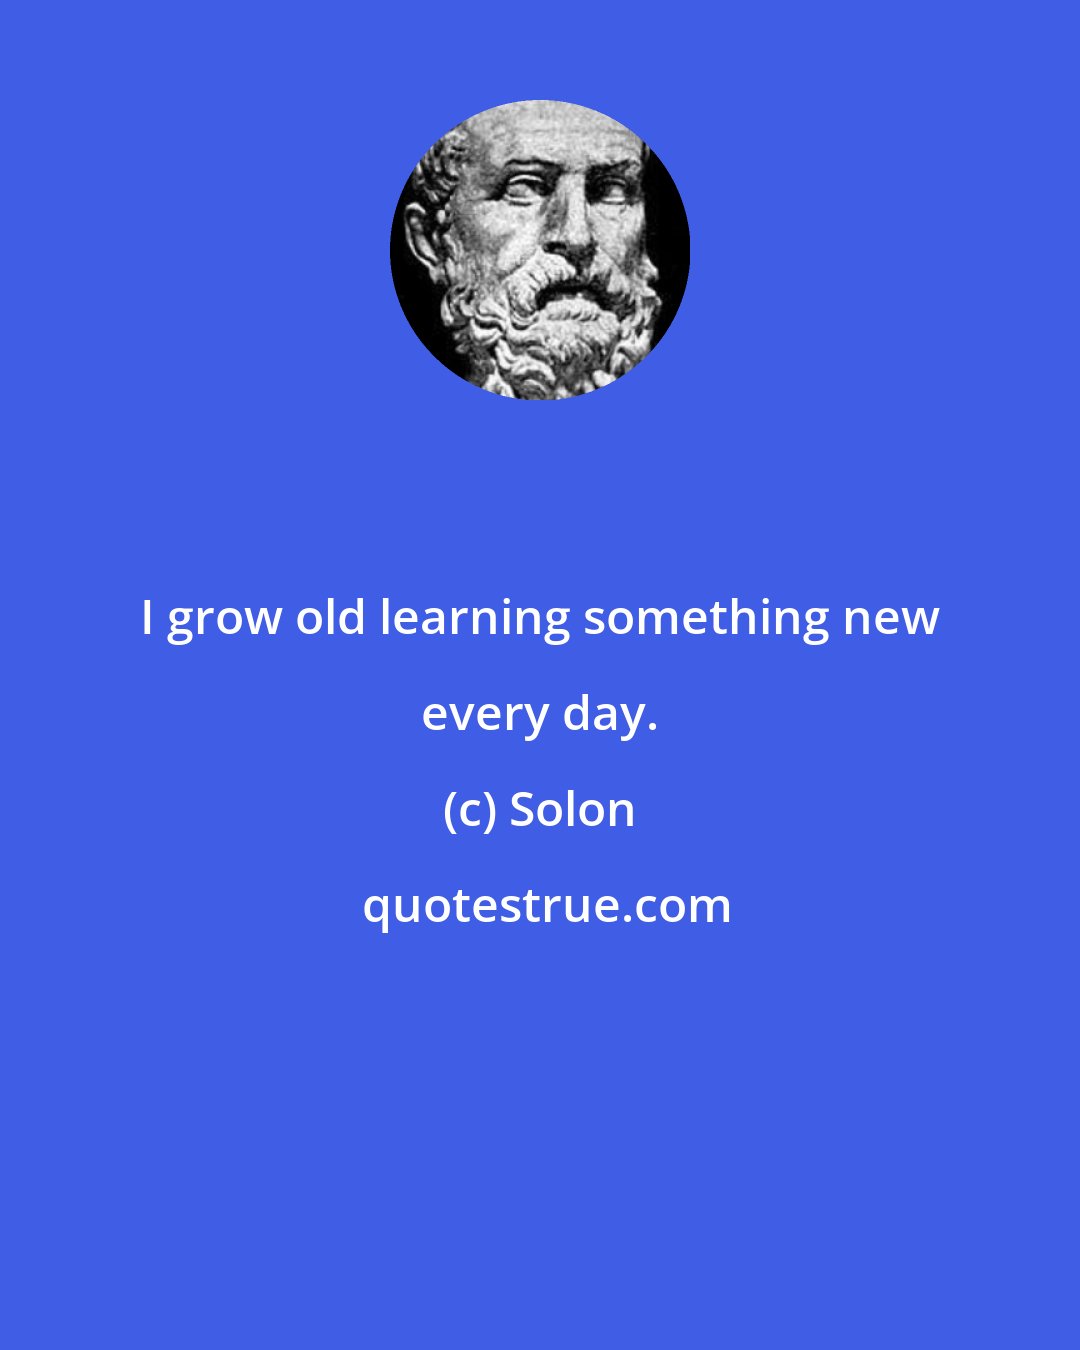 Solon: I grow old learning something new every day.